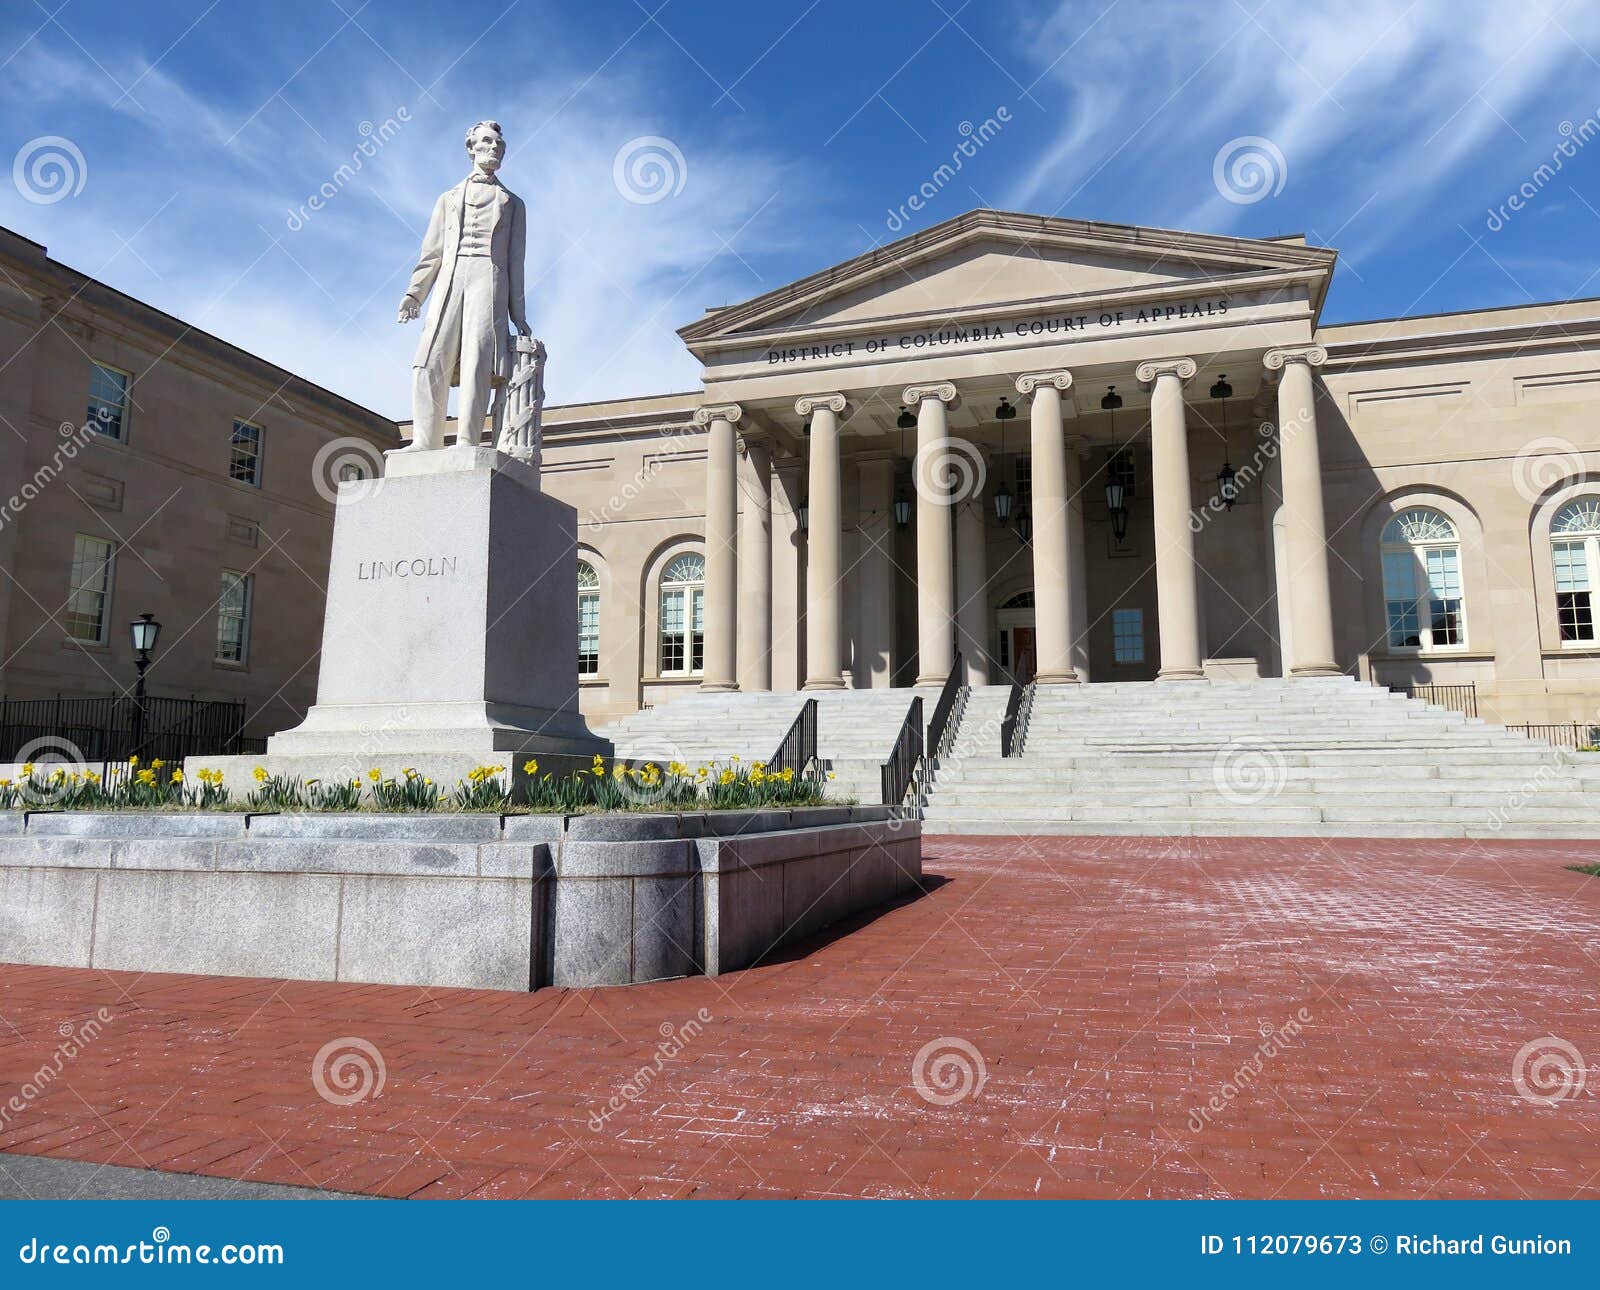 district of columbia court of appeals and statue